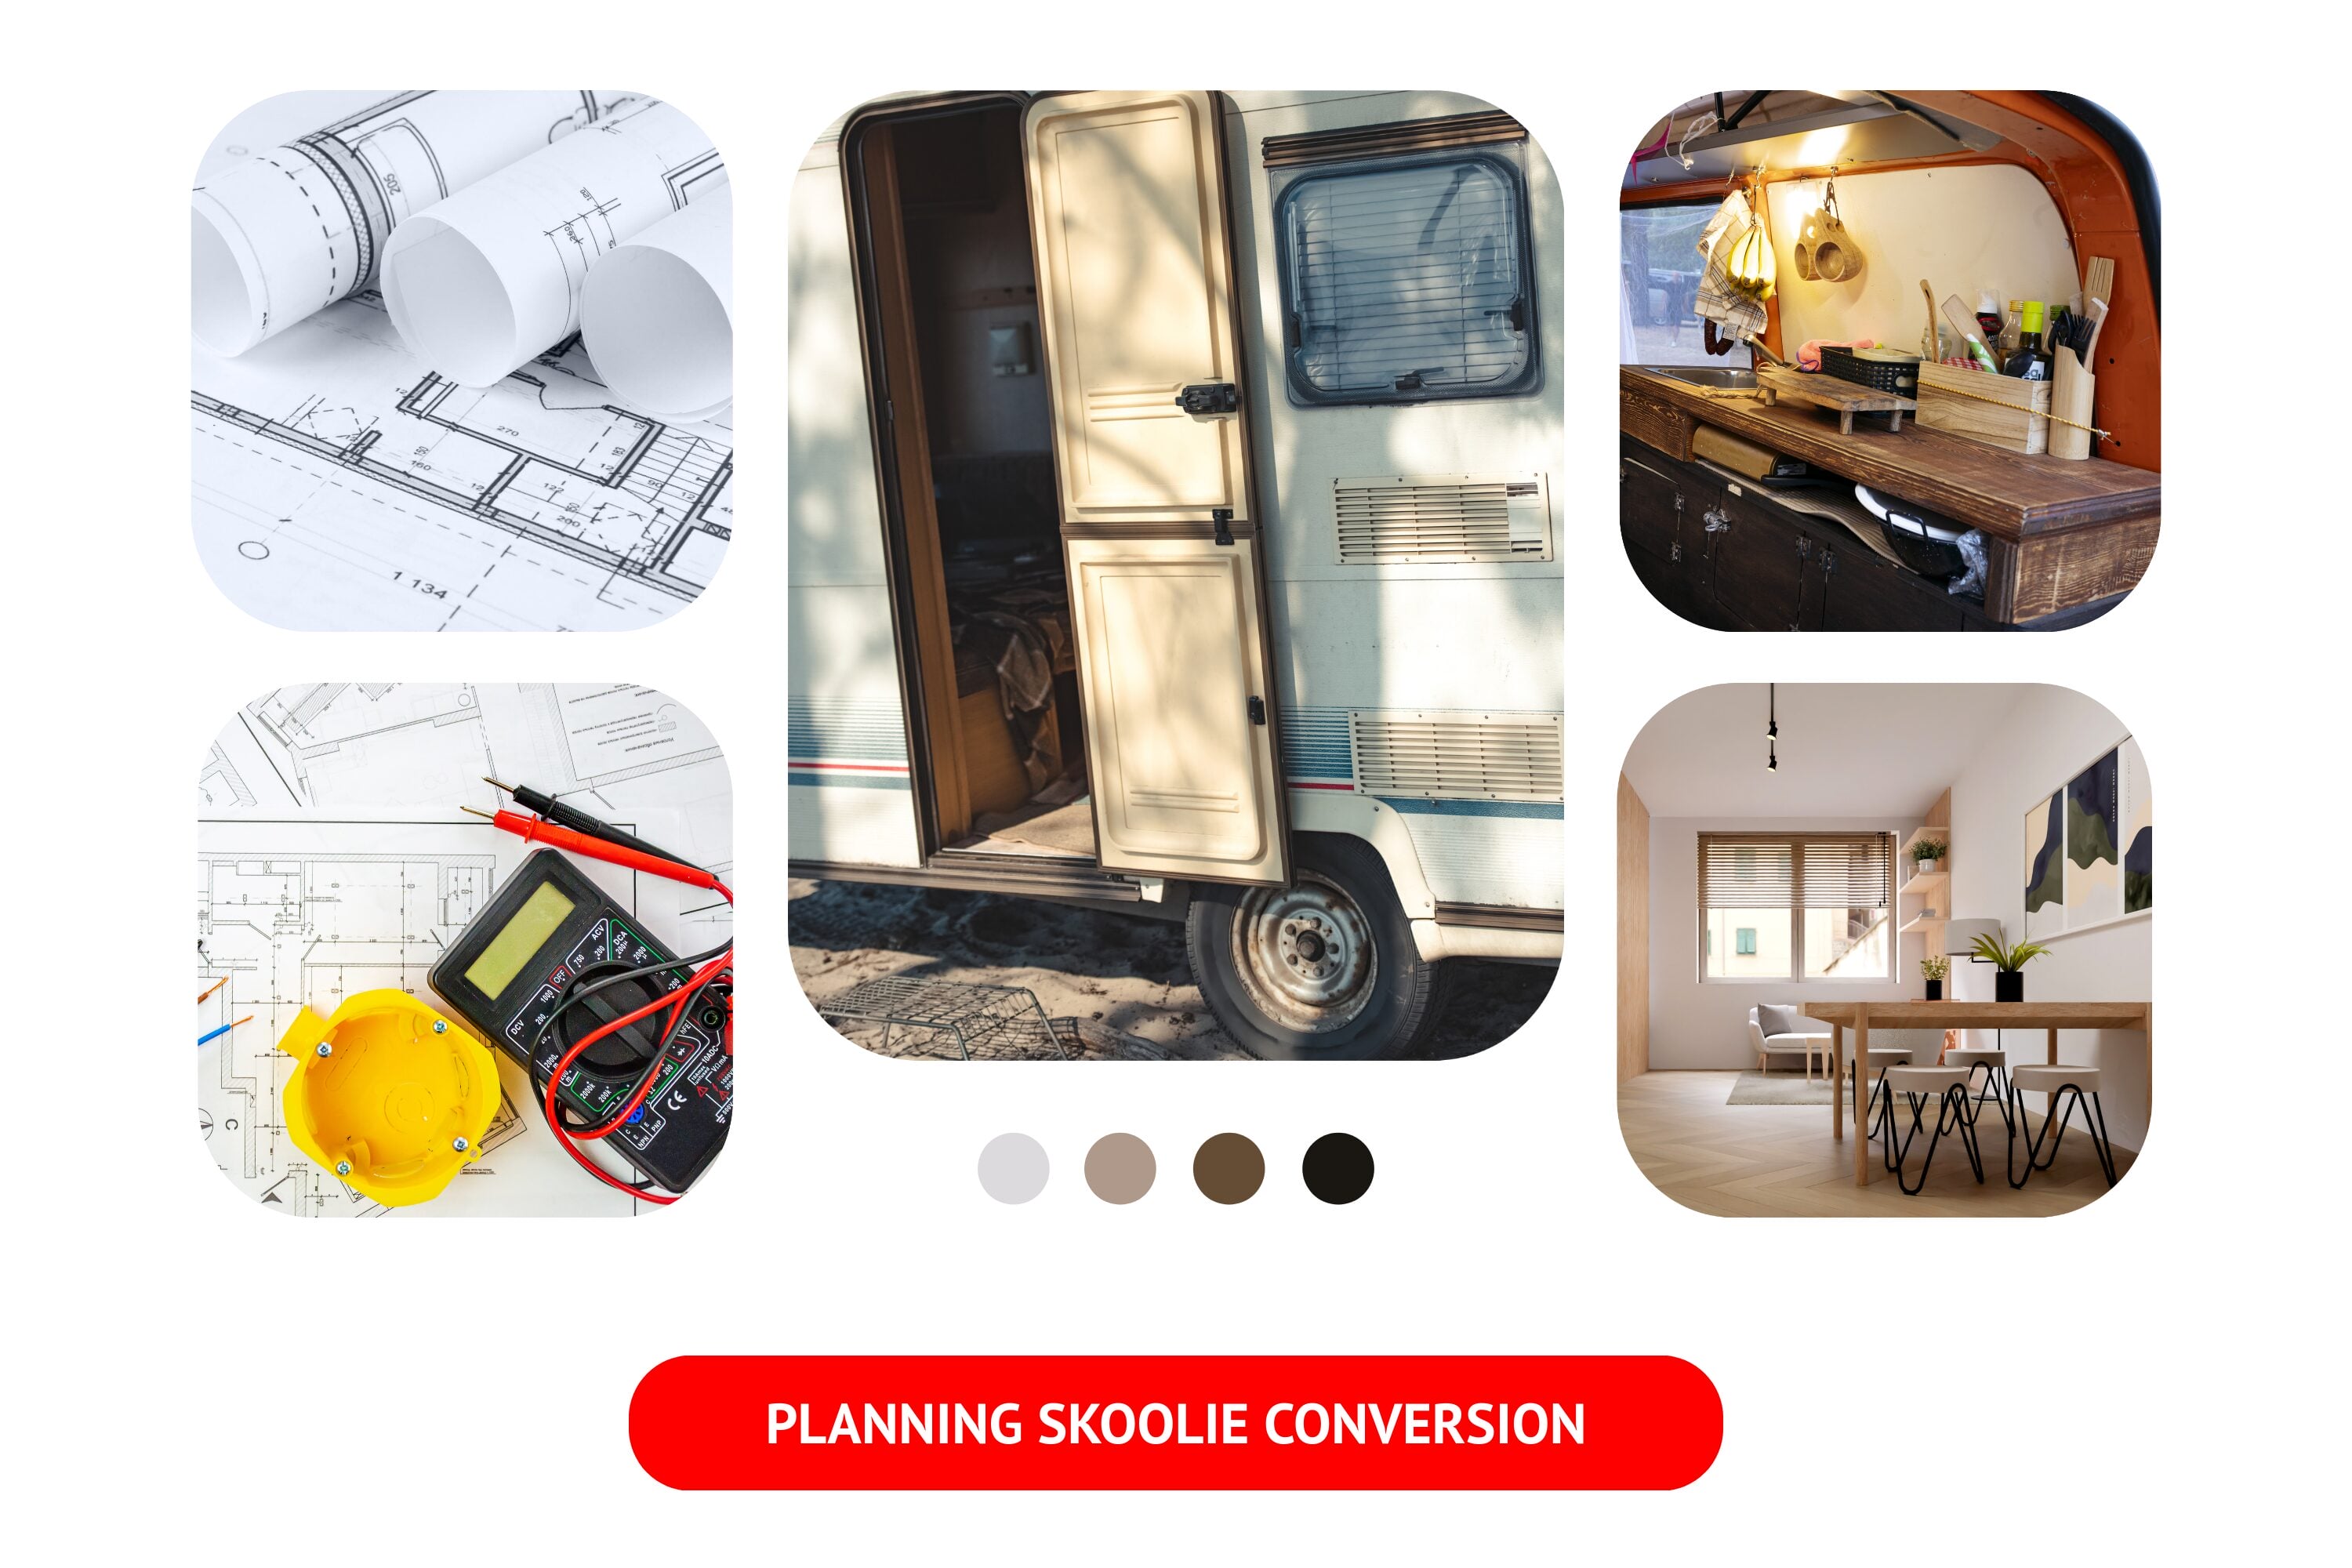 Plan and organize your Skoolie conversion process.